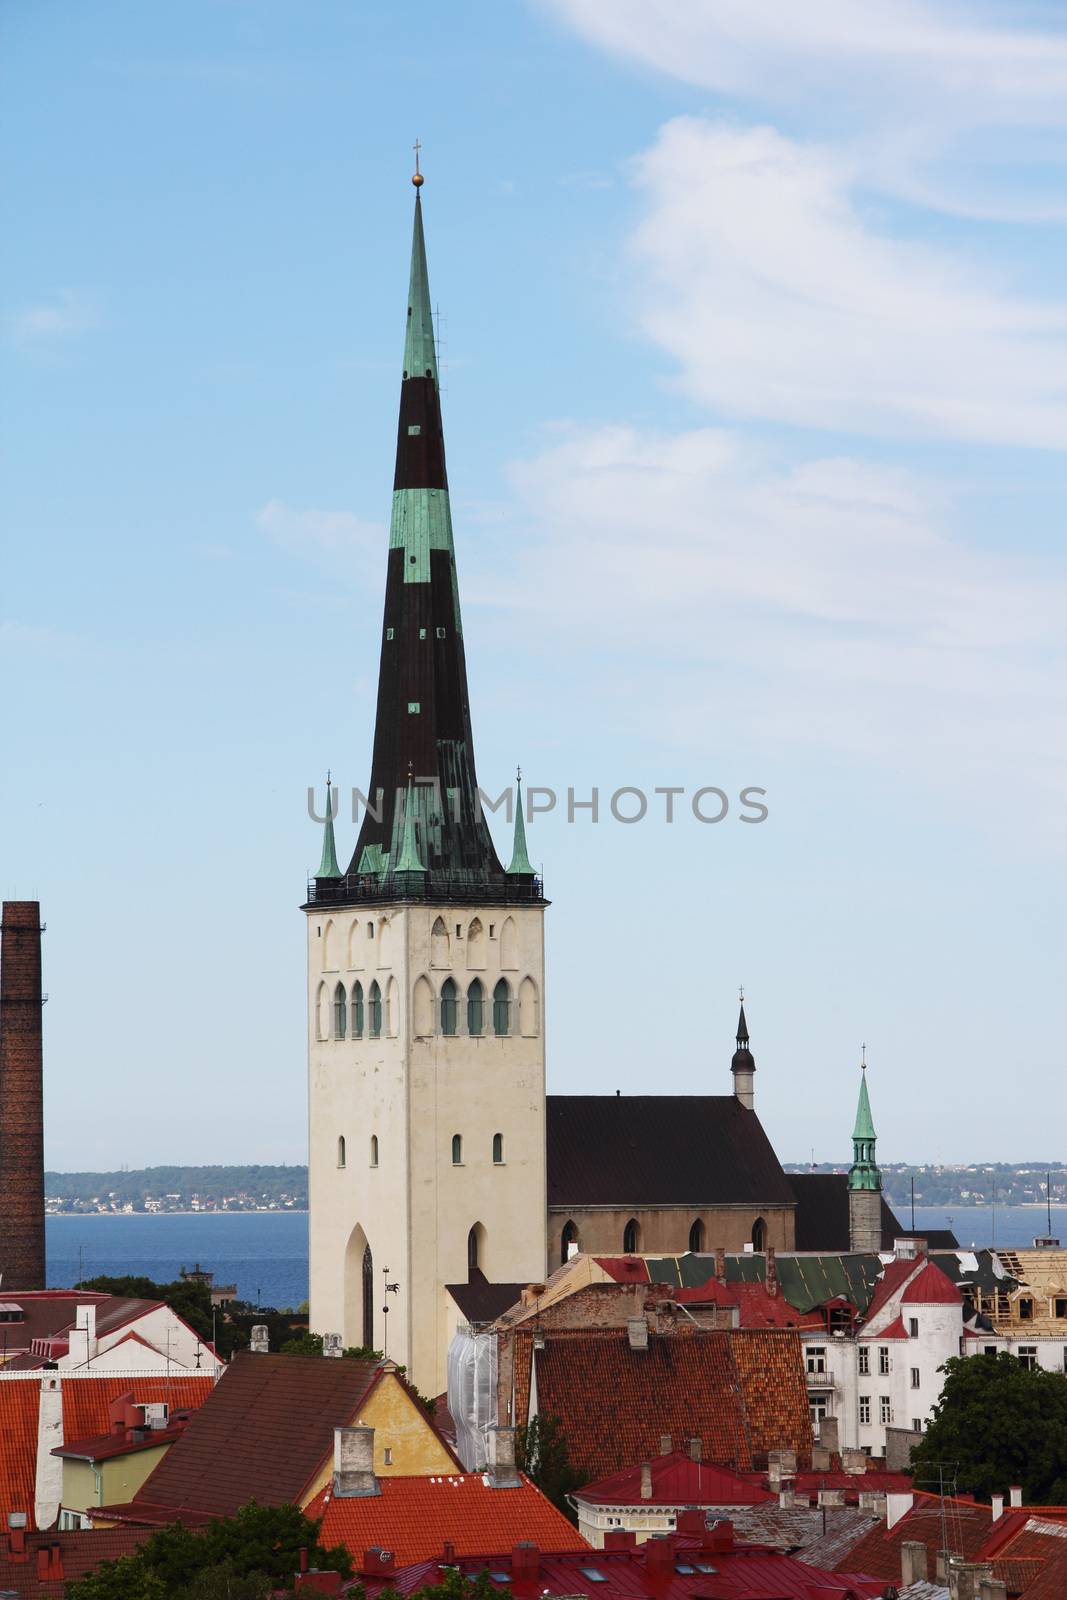 Panorama of the old town of Tallinn in summer